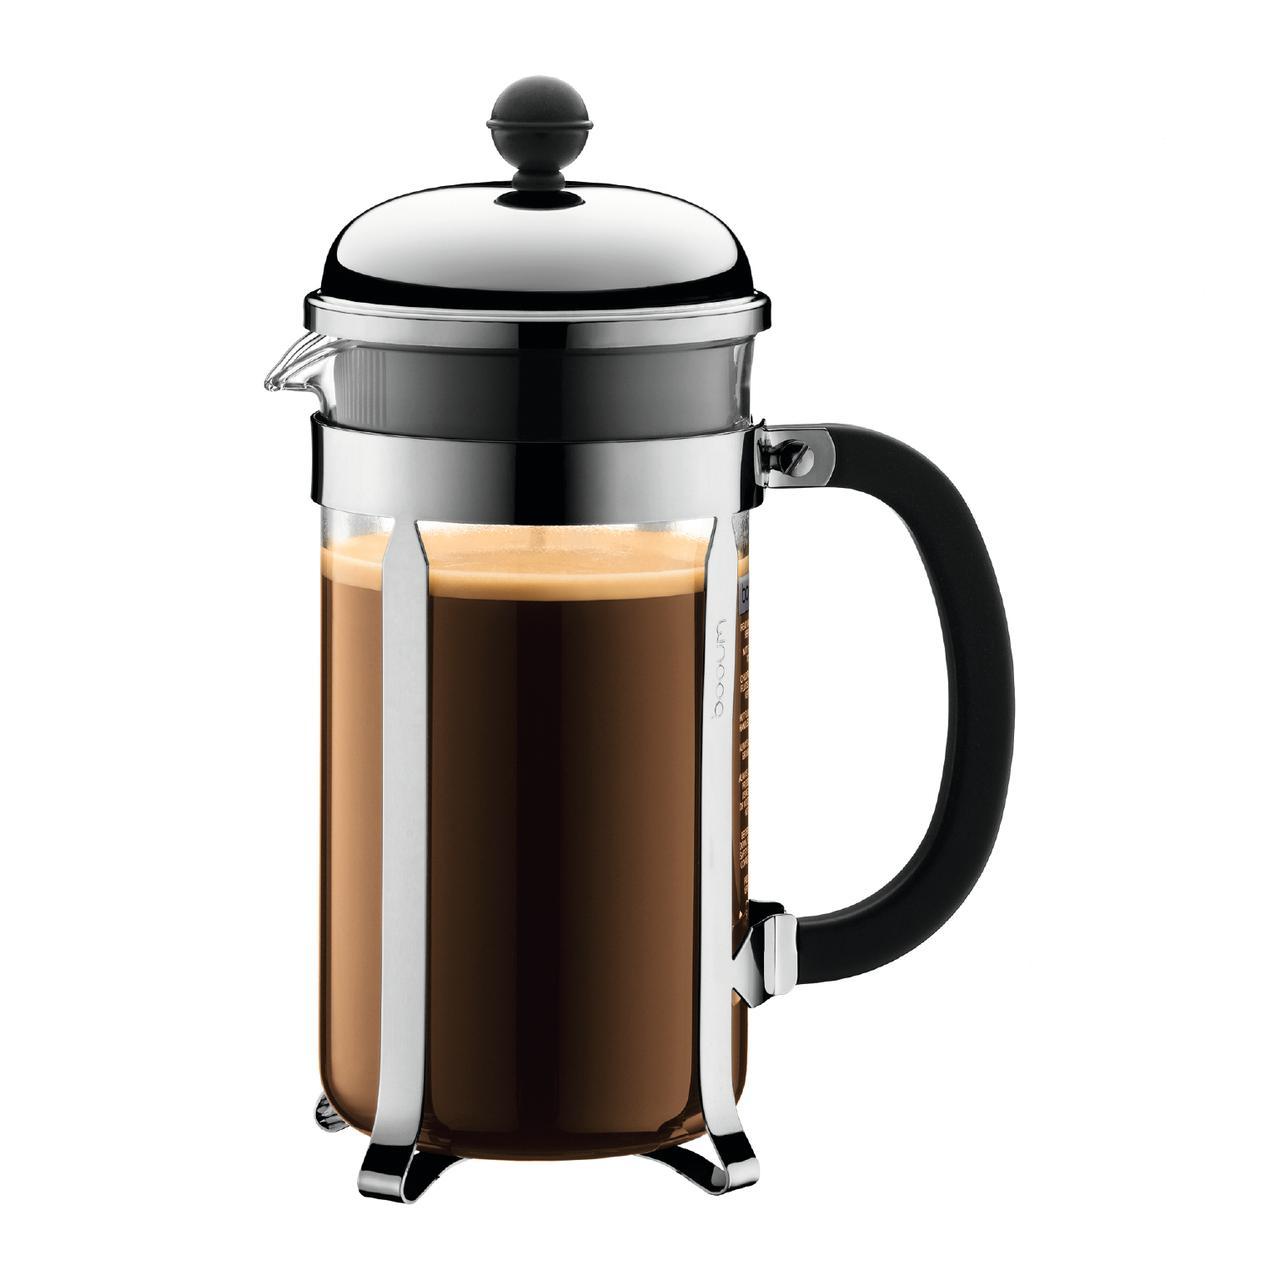 Bodum Chambord 8-Cup French Press Coffee Maker for $21.59